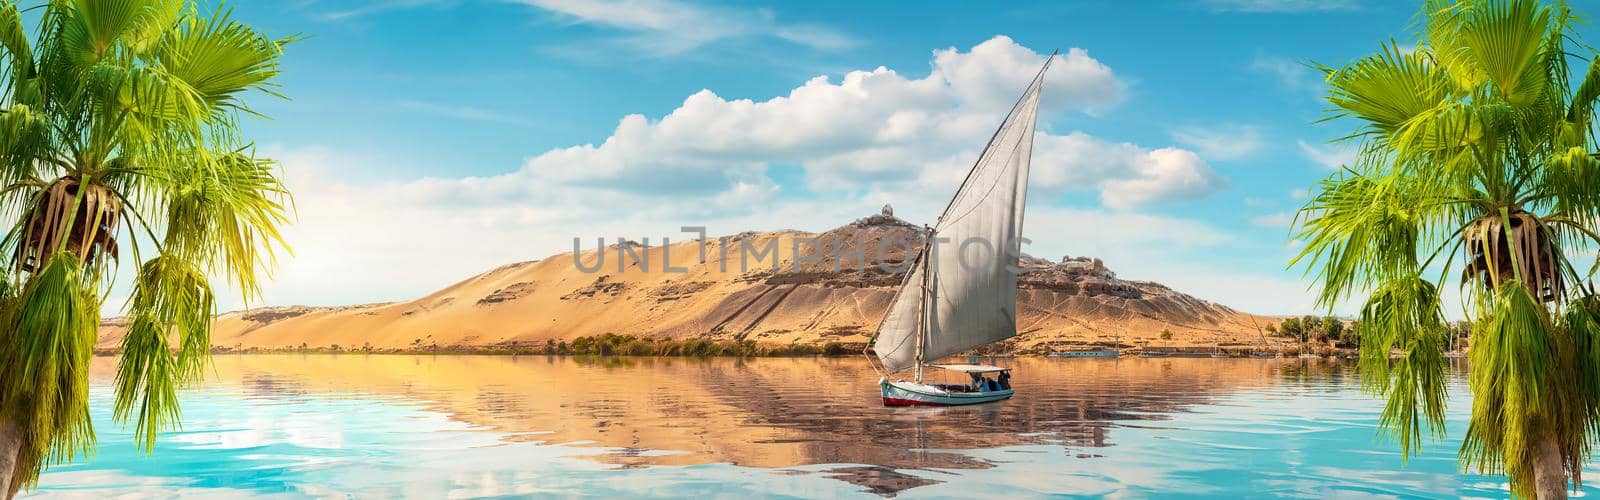 View of the Great Nile in Aswan